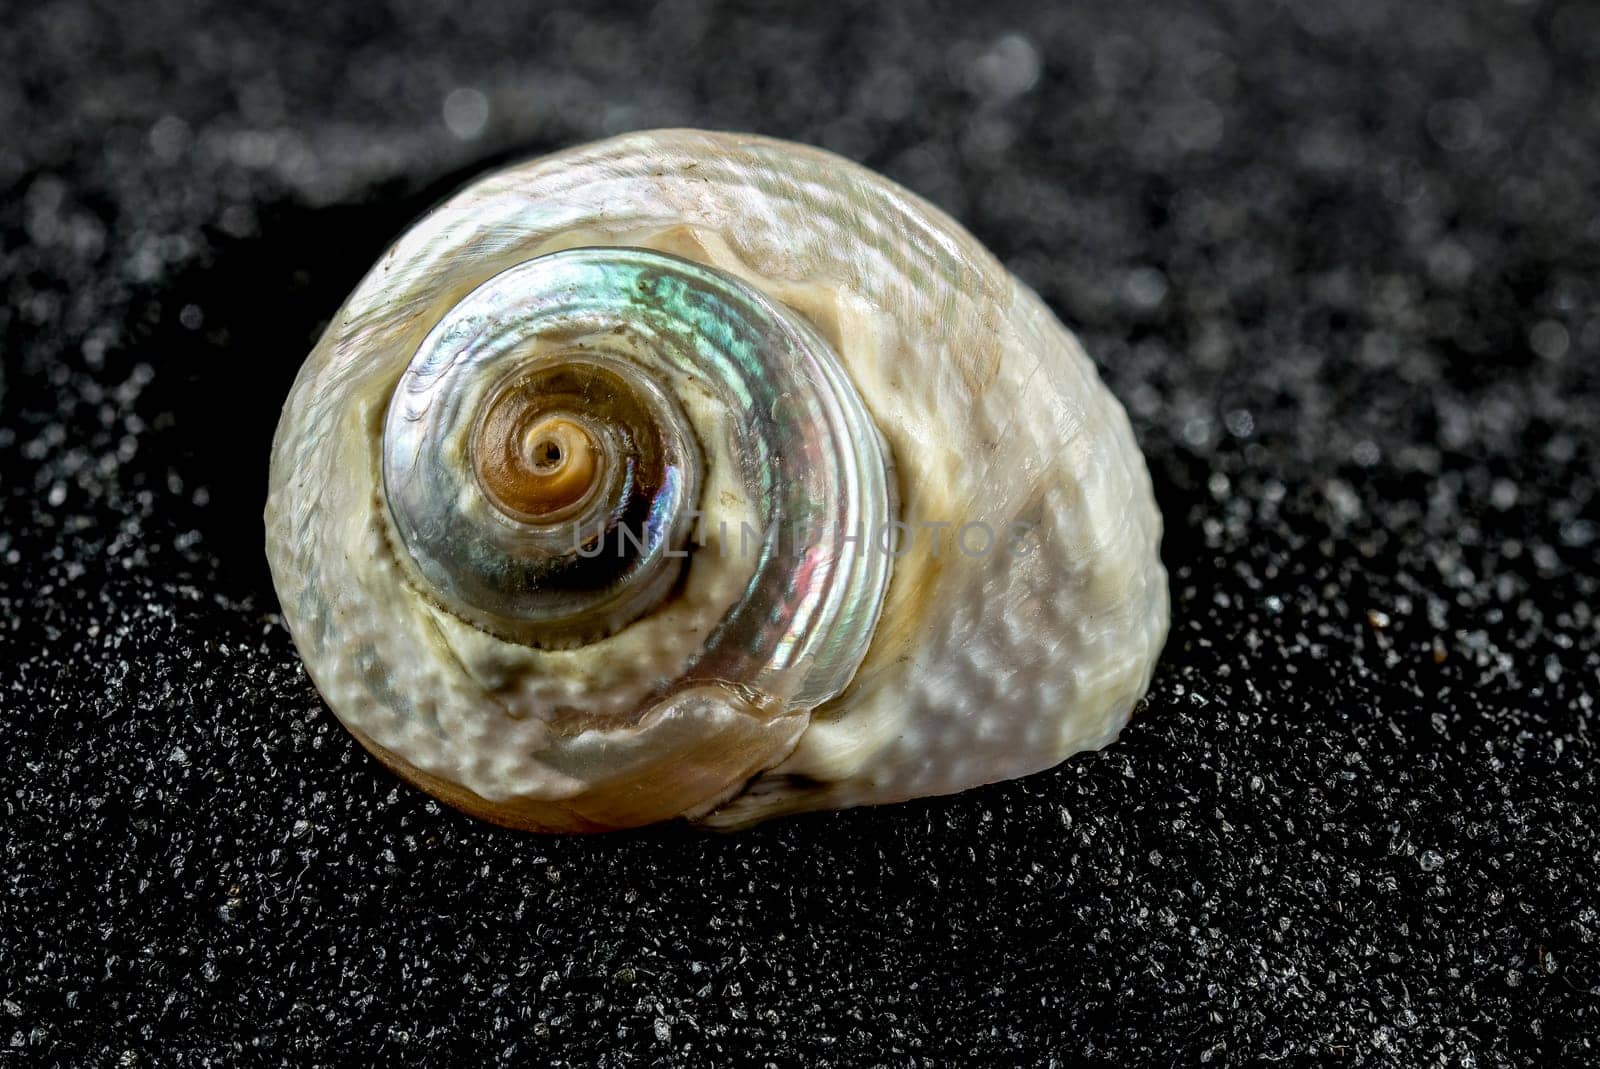 Turbo marmoratus shell on a black sand background by Multipedia